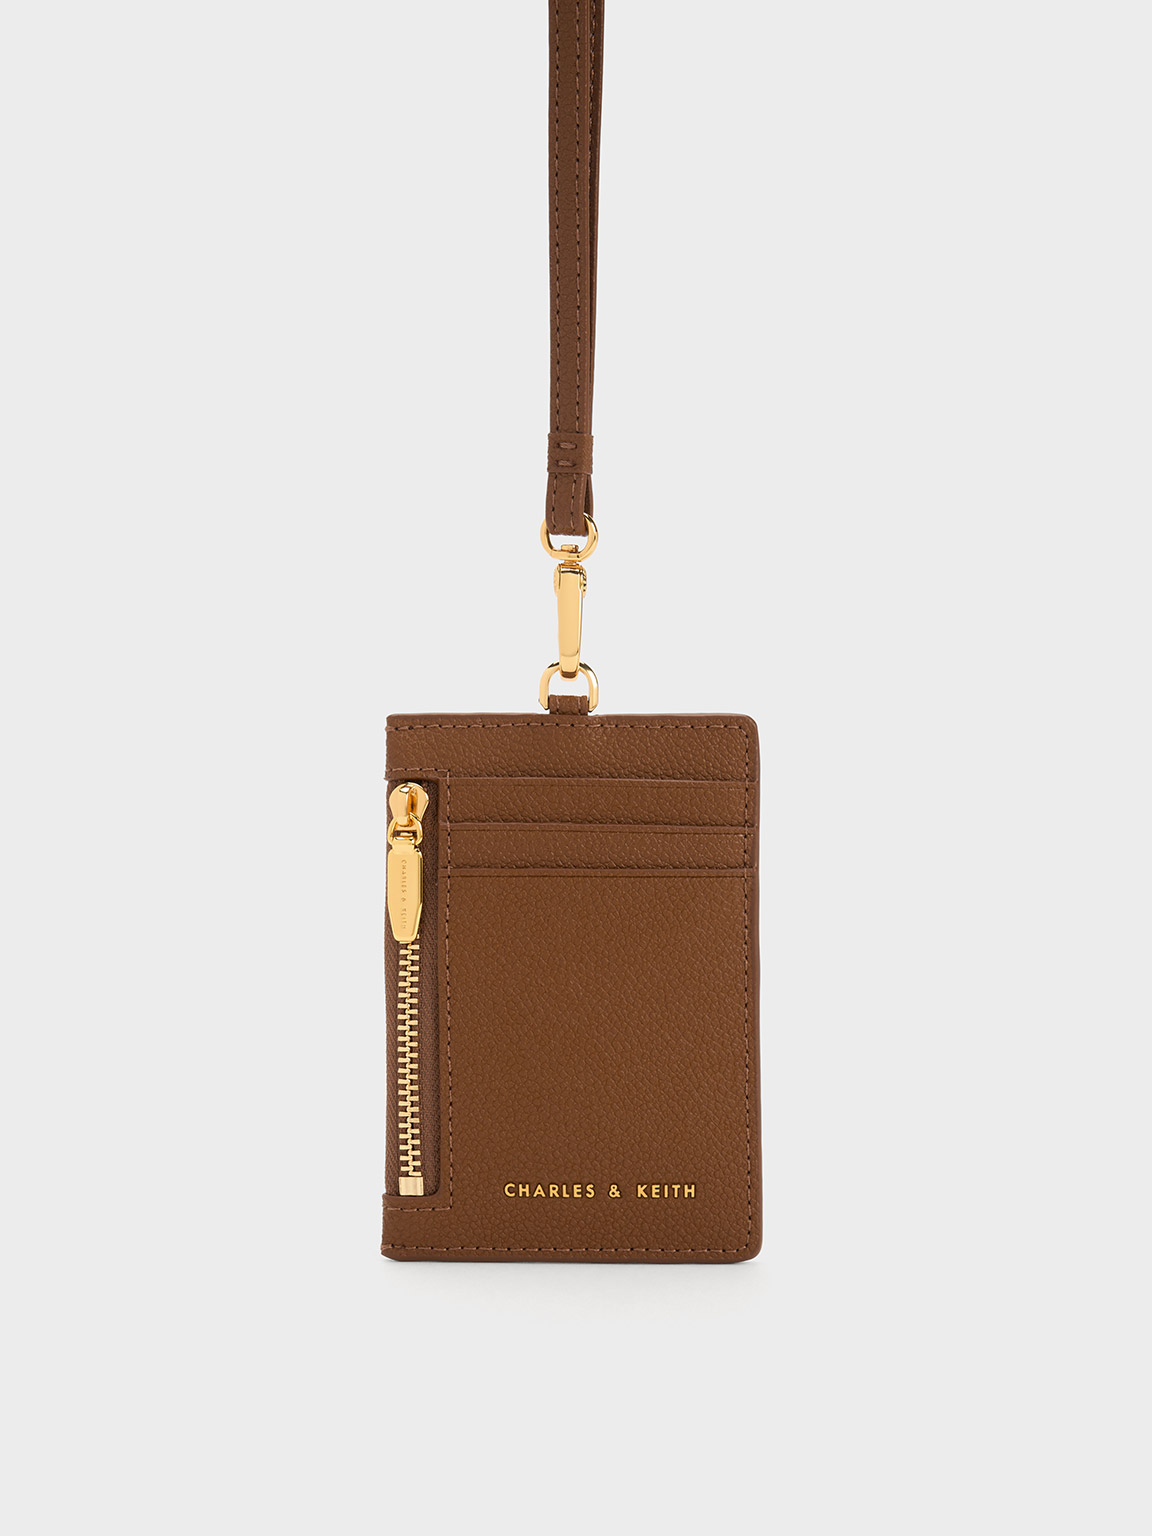 Hortory classic leather iPhone case with lanyard and card holder